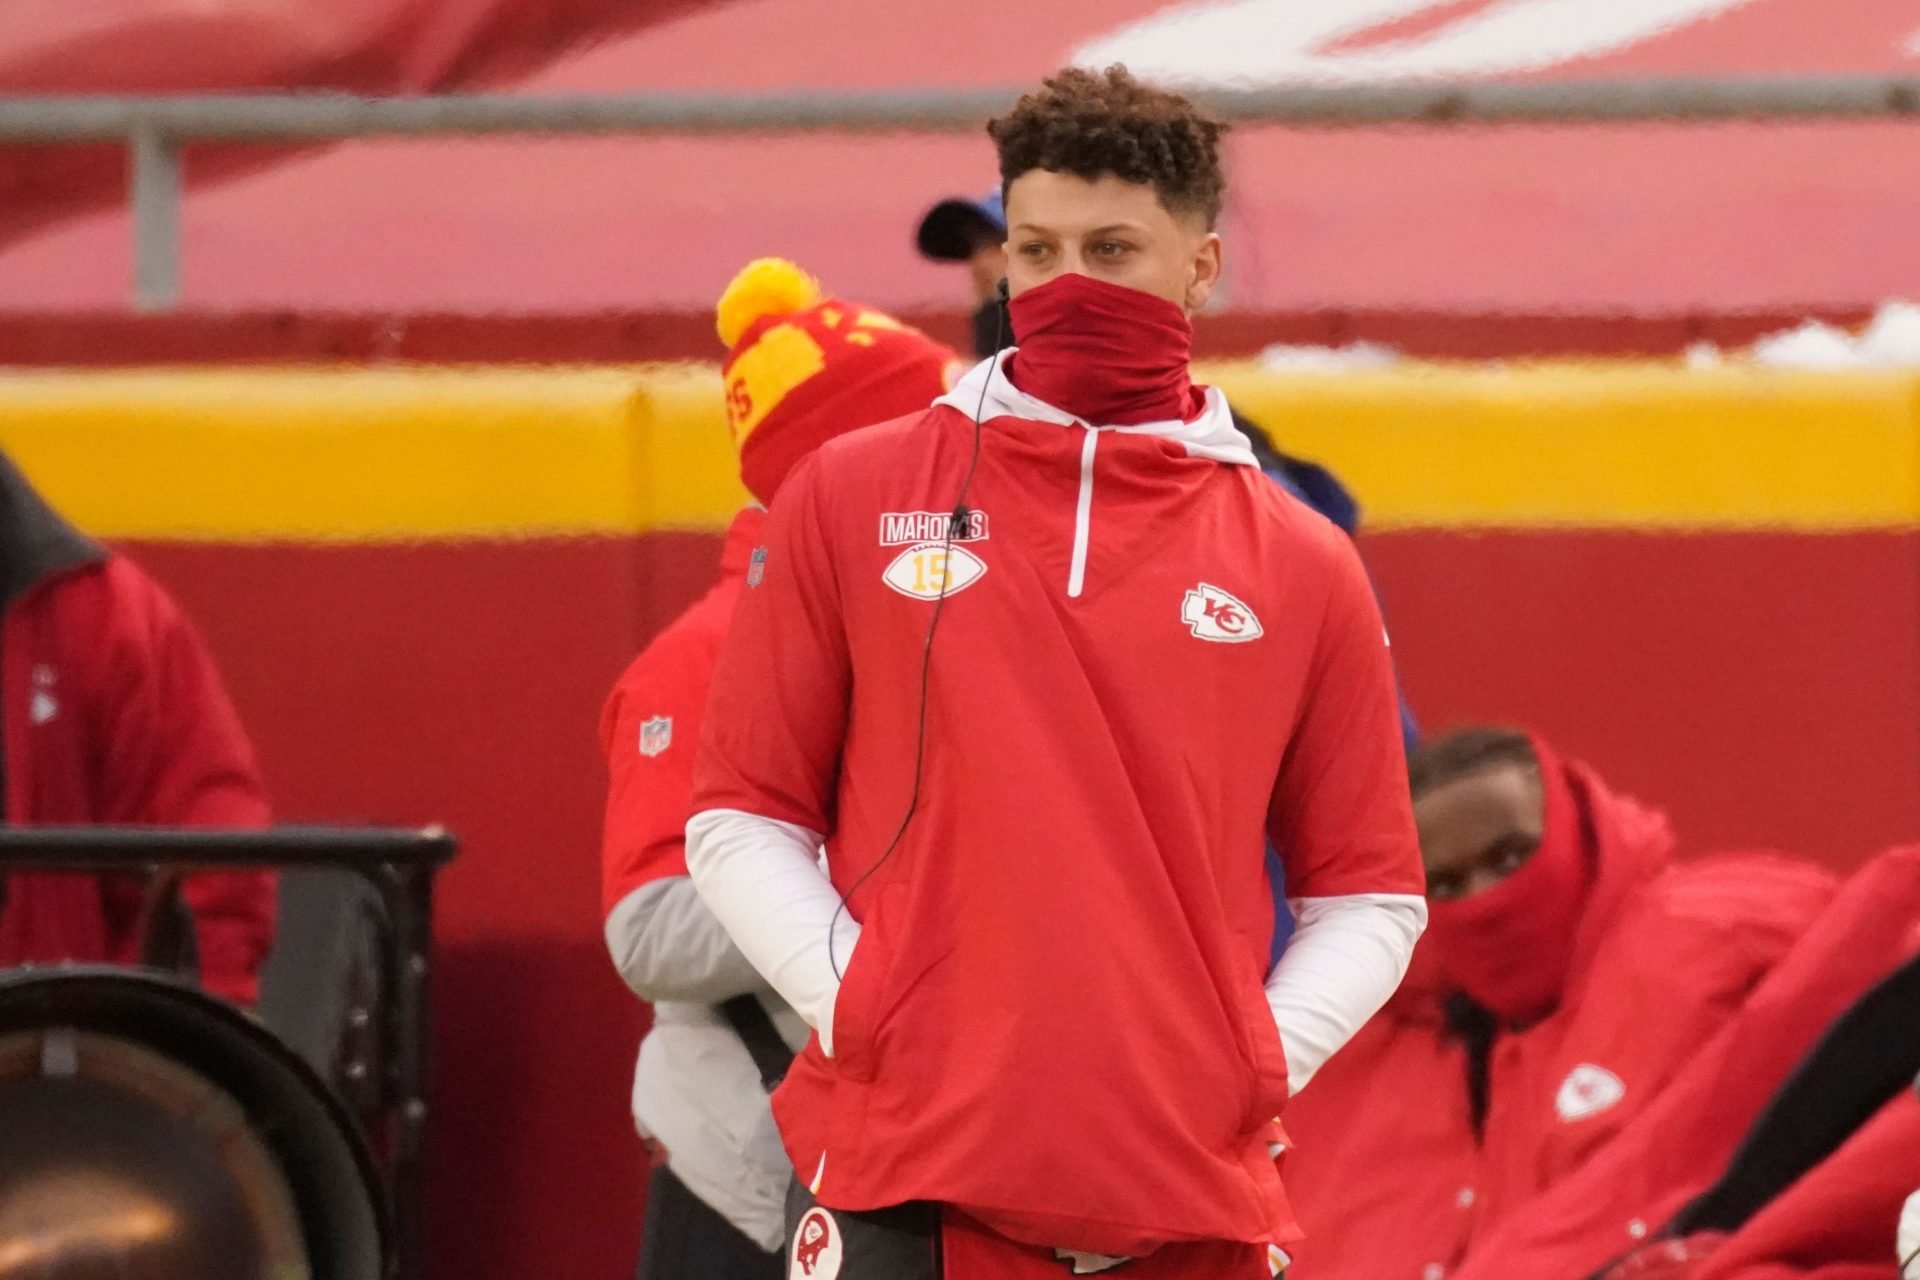 What Is Patrick Mahomes’ Net Worth?